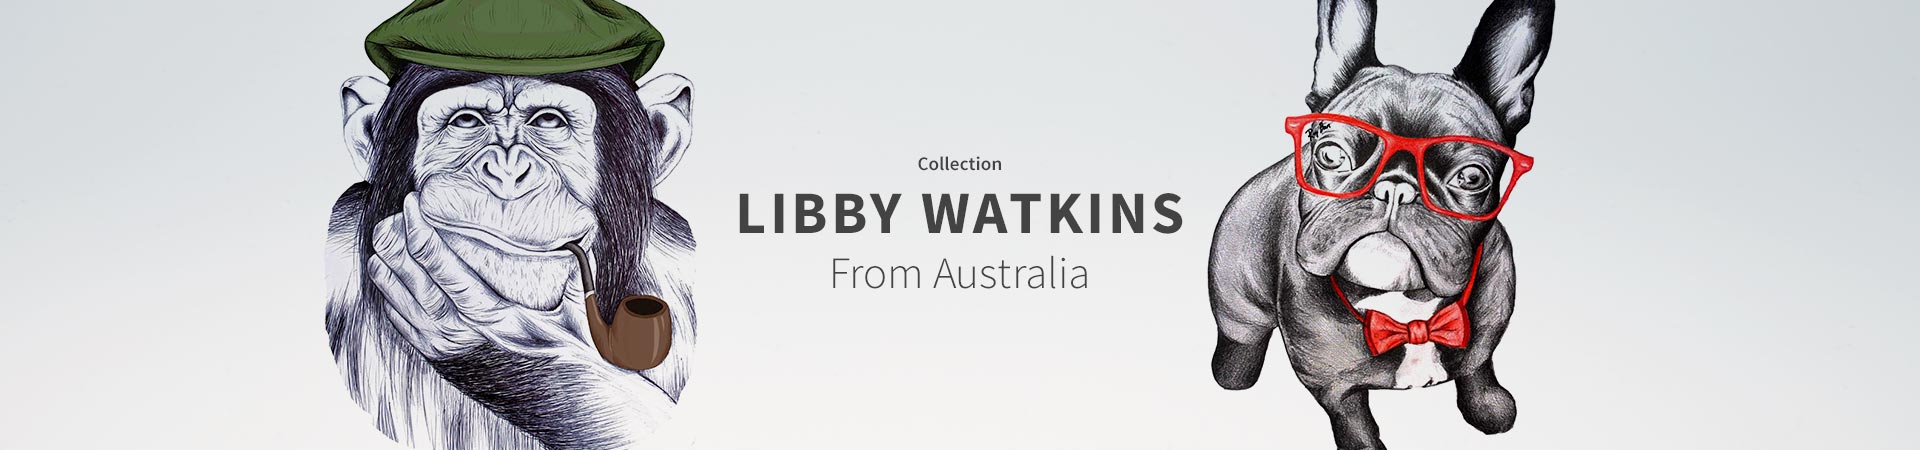 Collection Libby Watkins